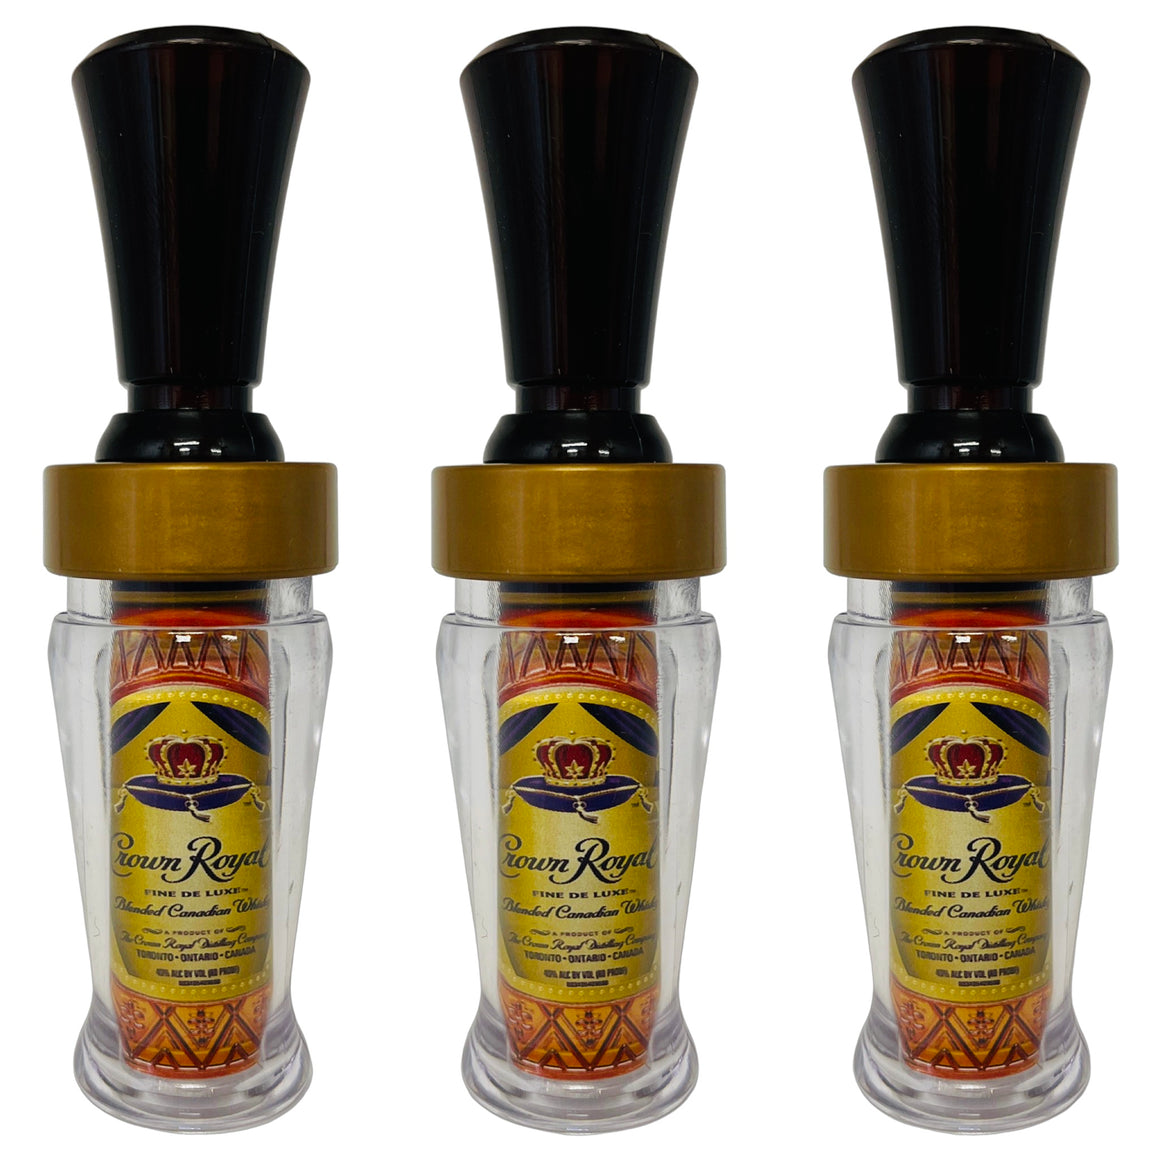 POLYCARBONATE IMAGE DUCK CALL CROWN ROYAL